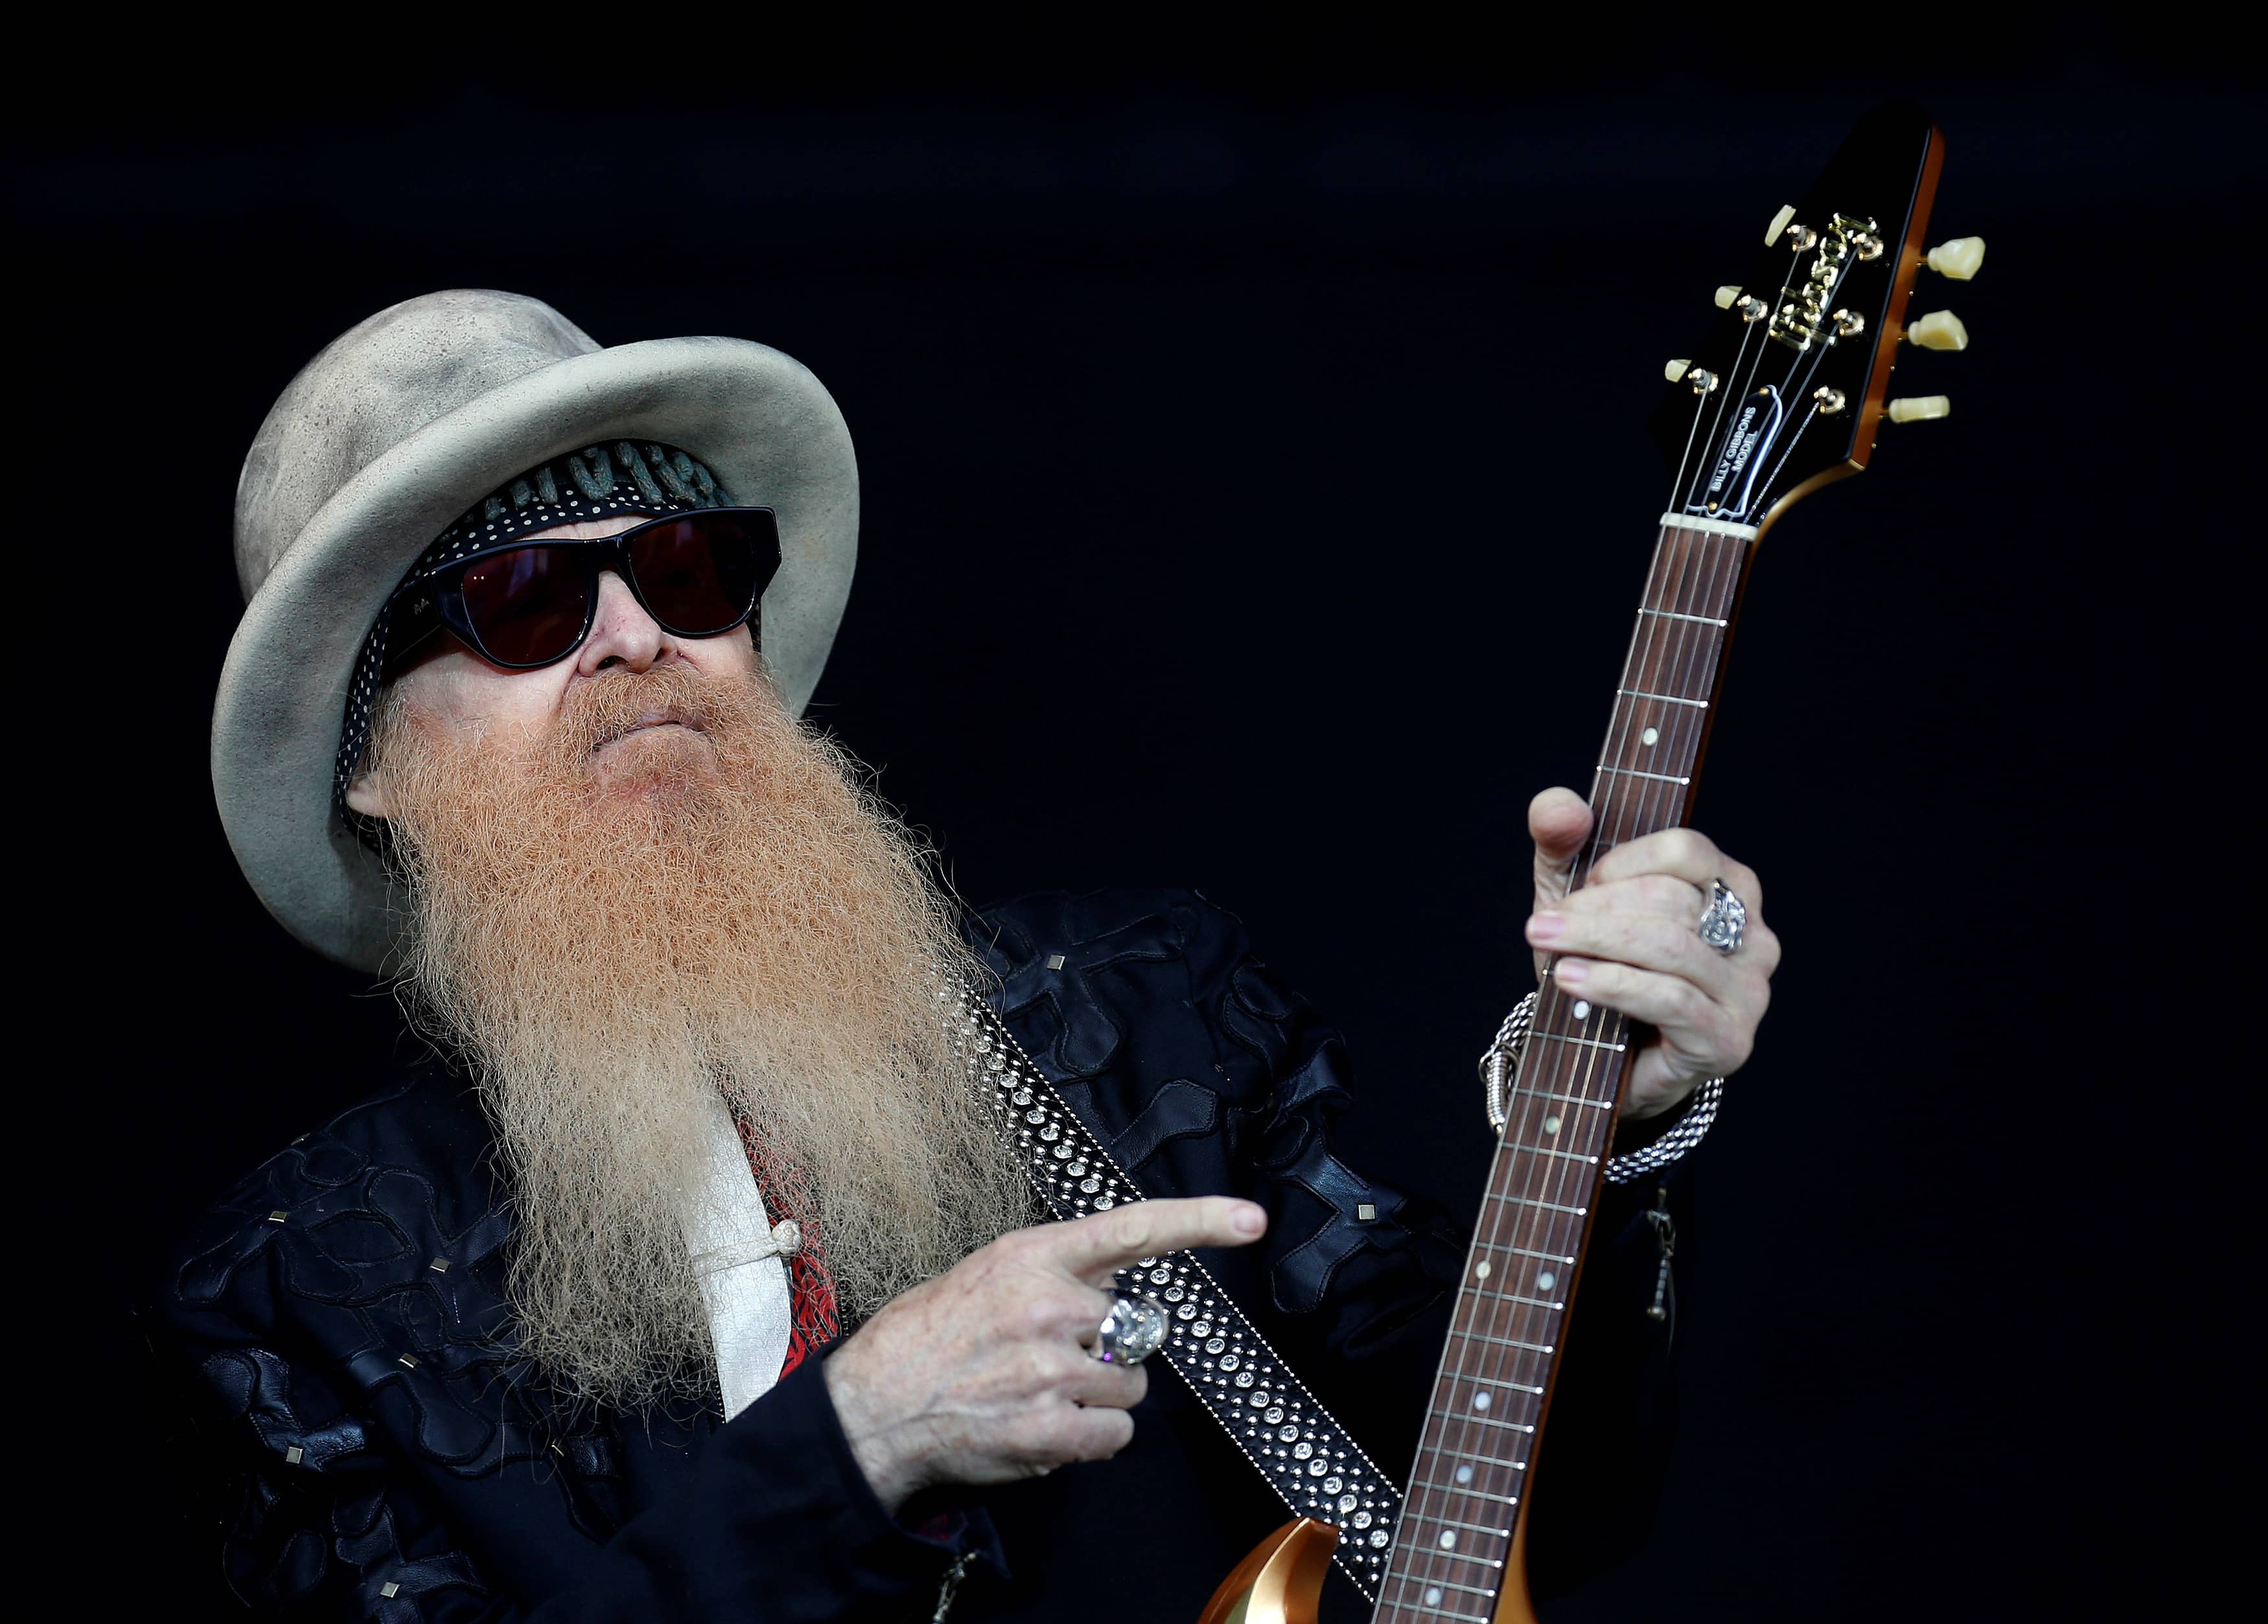 gibbons-of-zz-top-perform-on-the-pyramid-stage-at-worthy-farm-in-somerset-during-the-glastonbury-festival-2